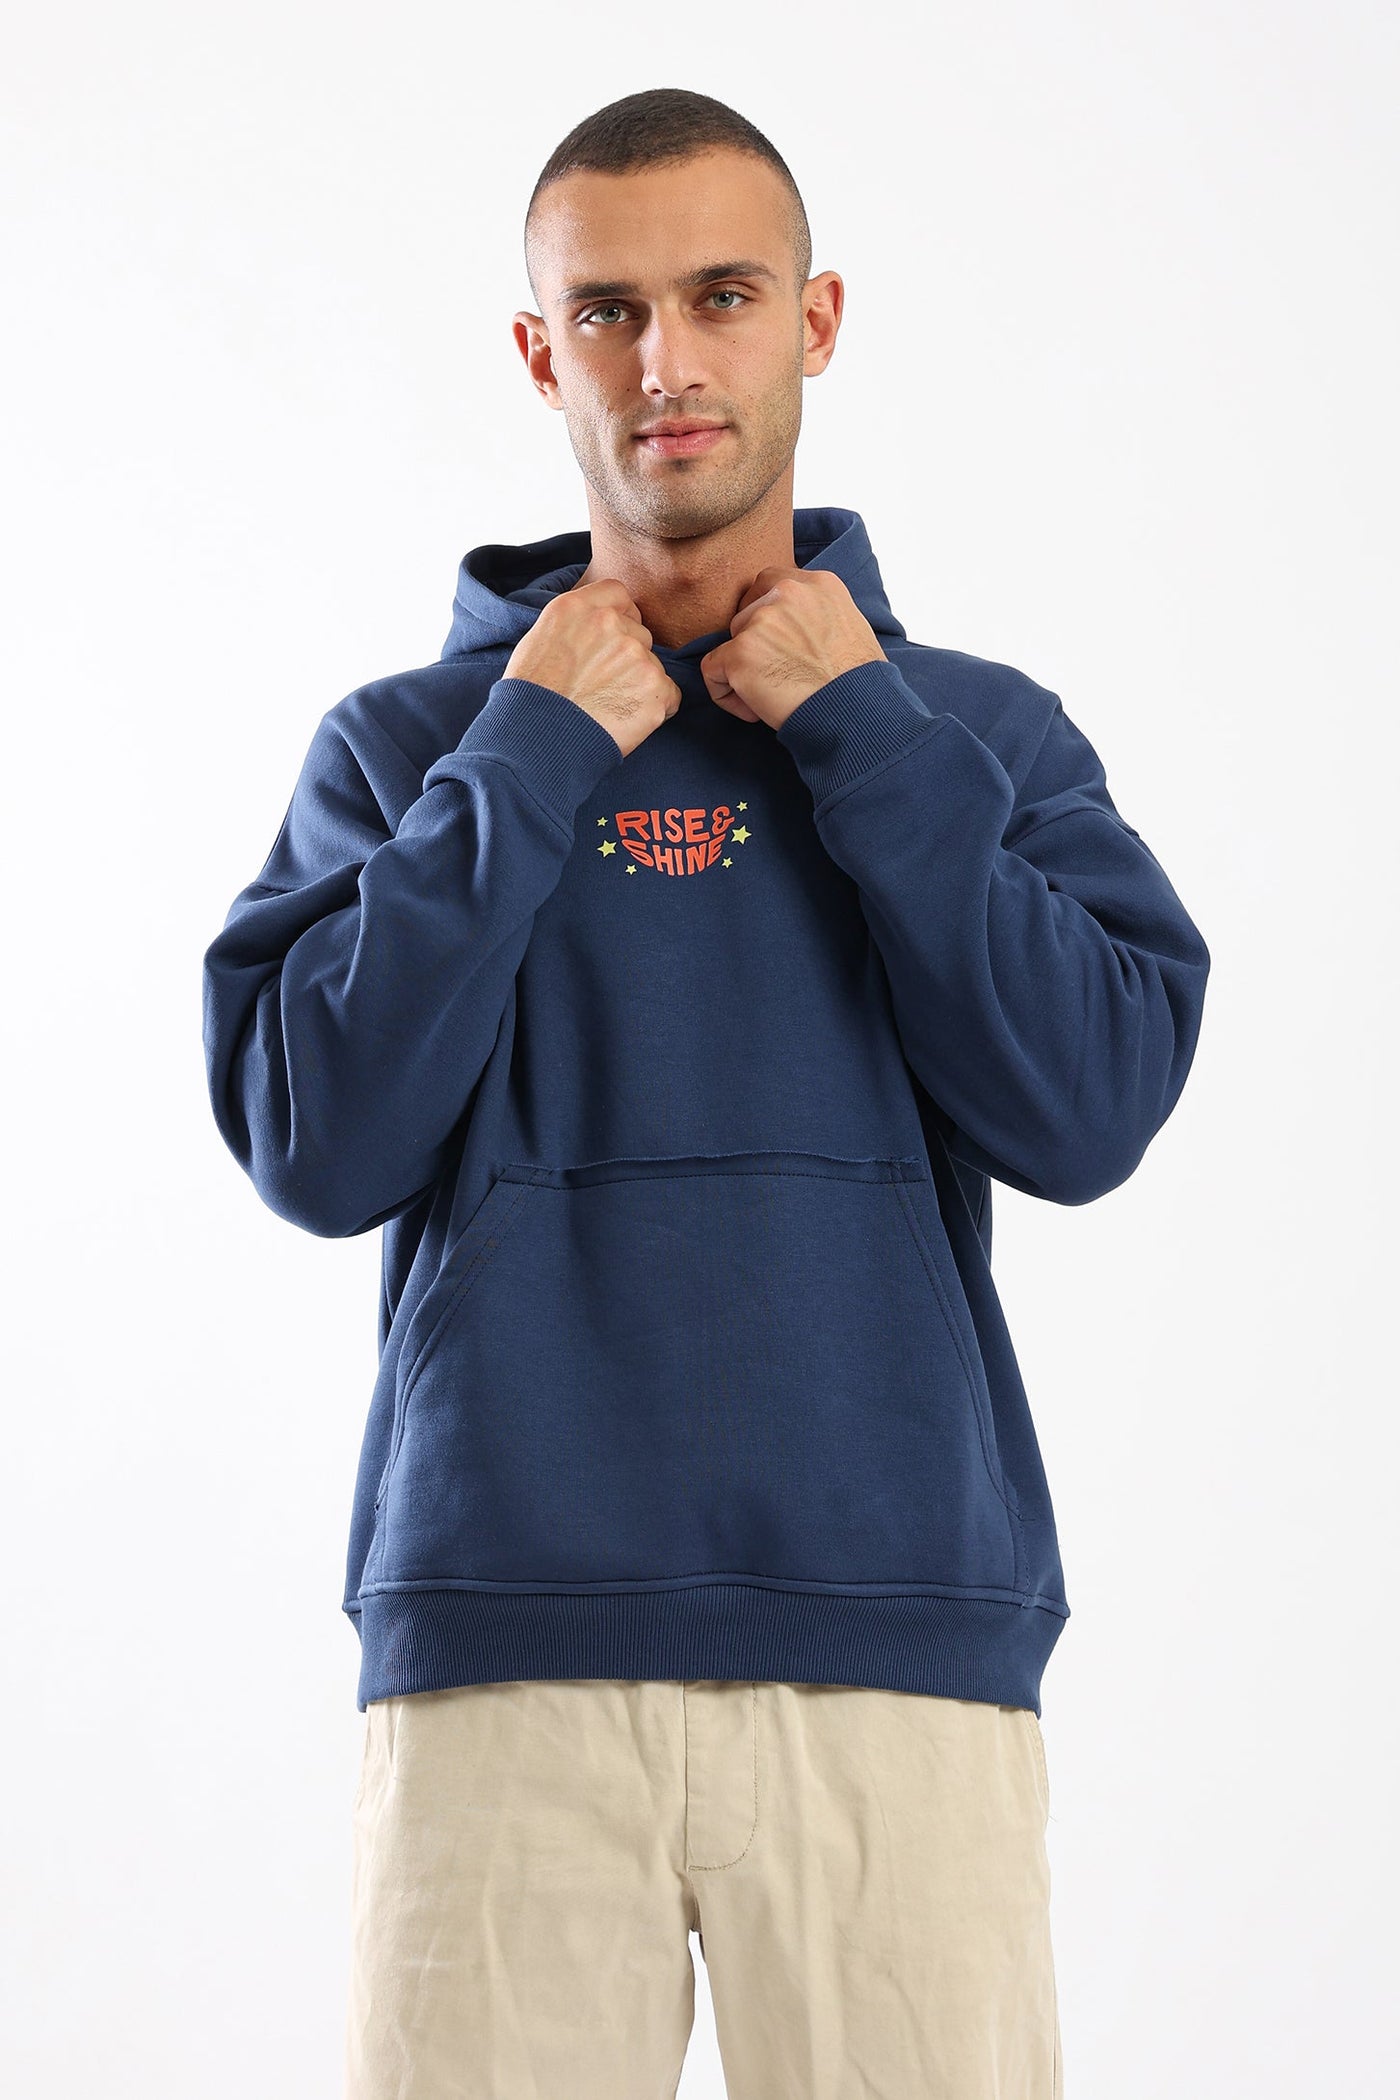 RISE AND SHINE HOODIE - NAVY